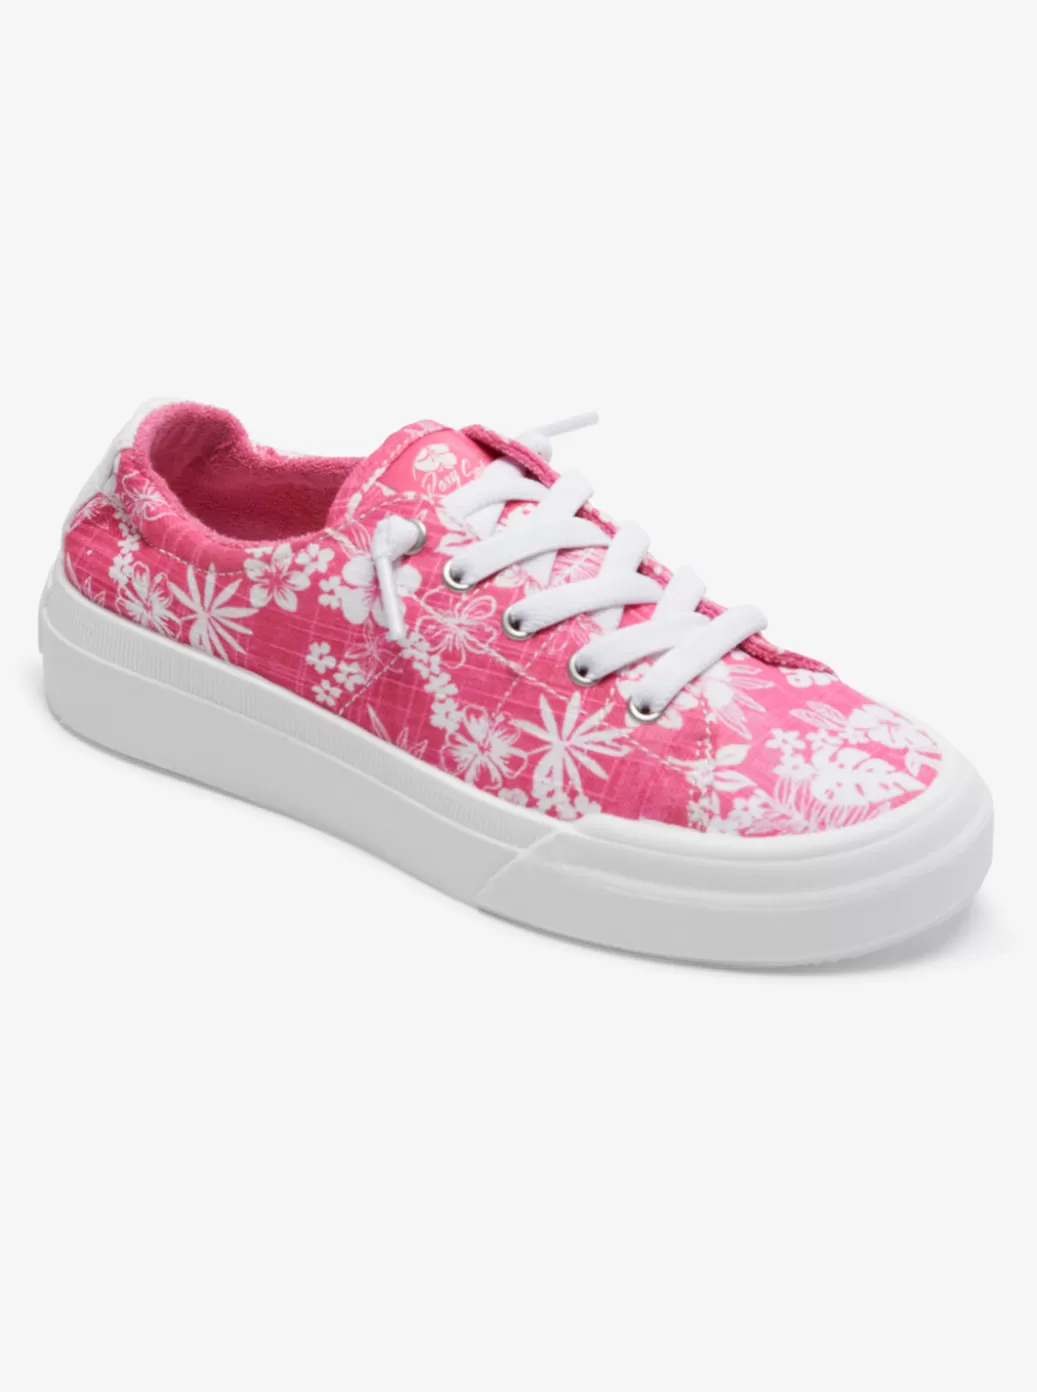 Sneakers | WOMEN ROXY Rae Shoes Crazy Pink Flower